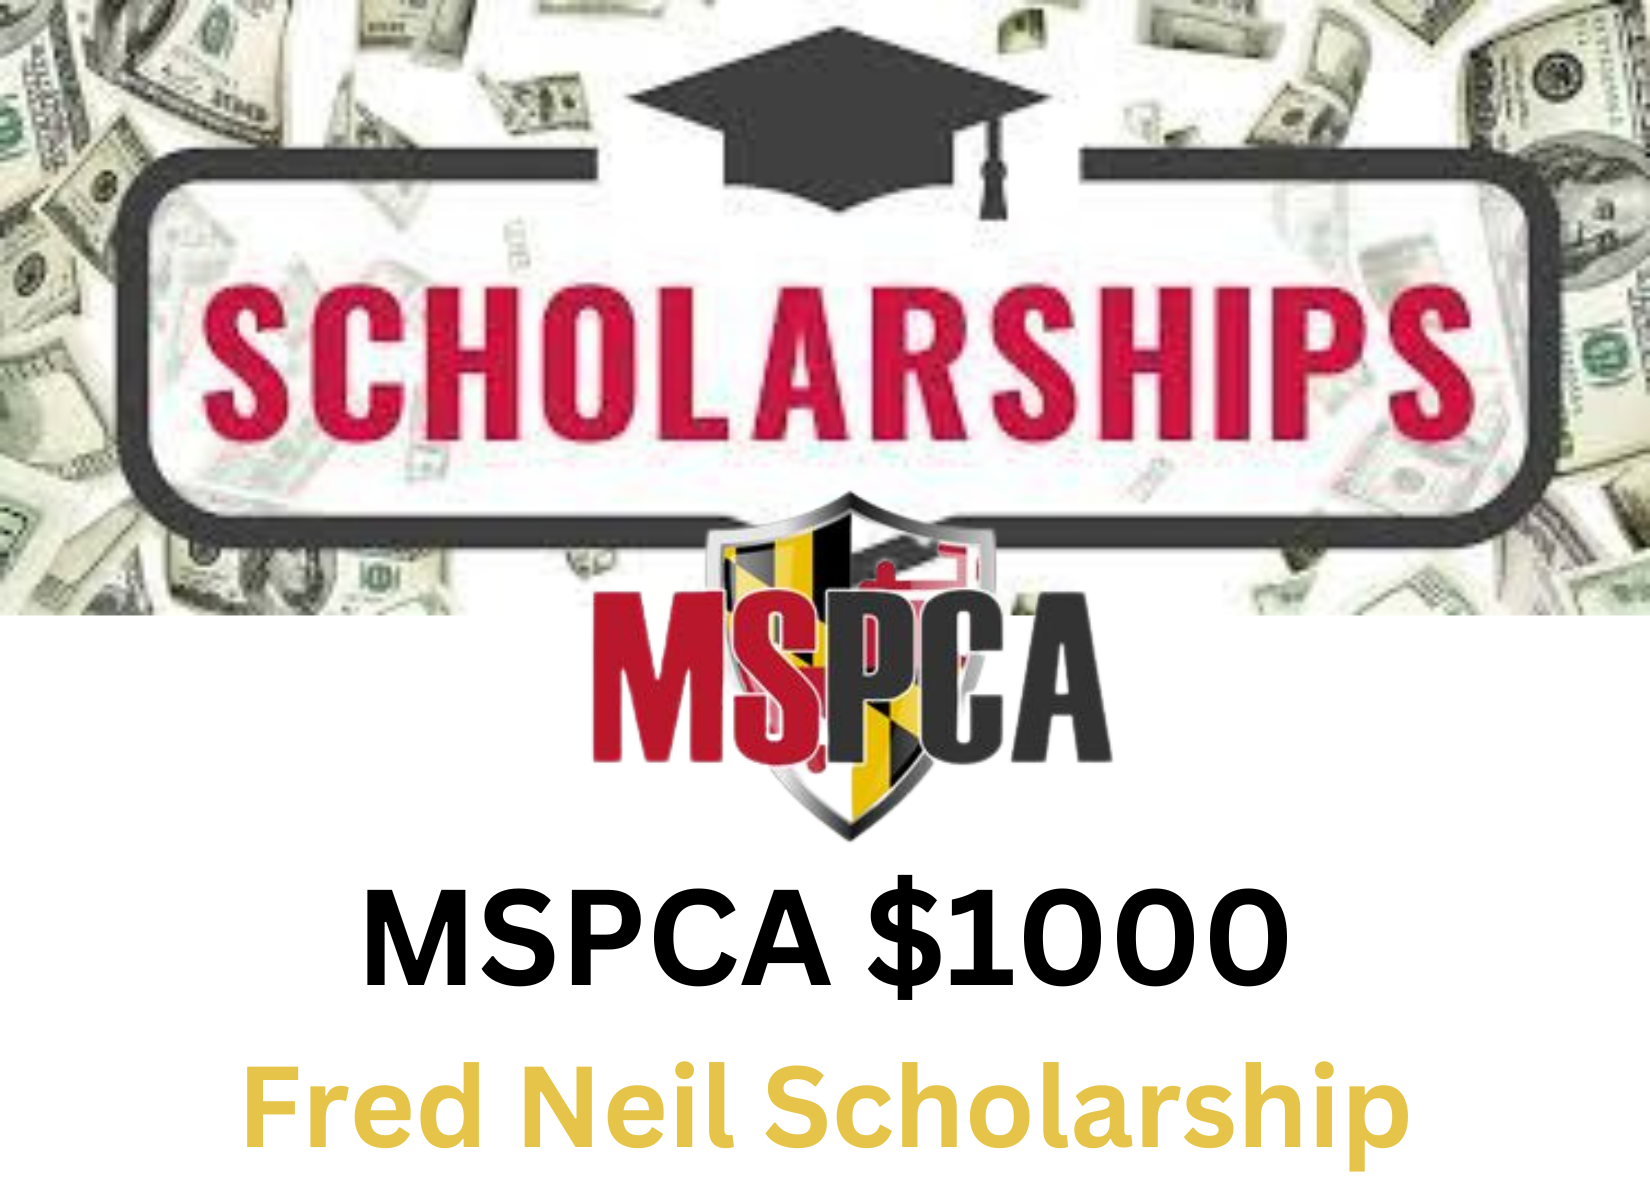 MSPCA Scholarships Available for Children or Employees of Member Companies